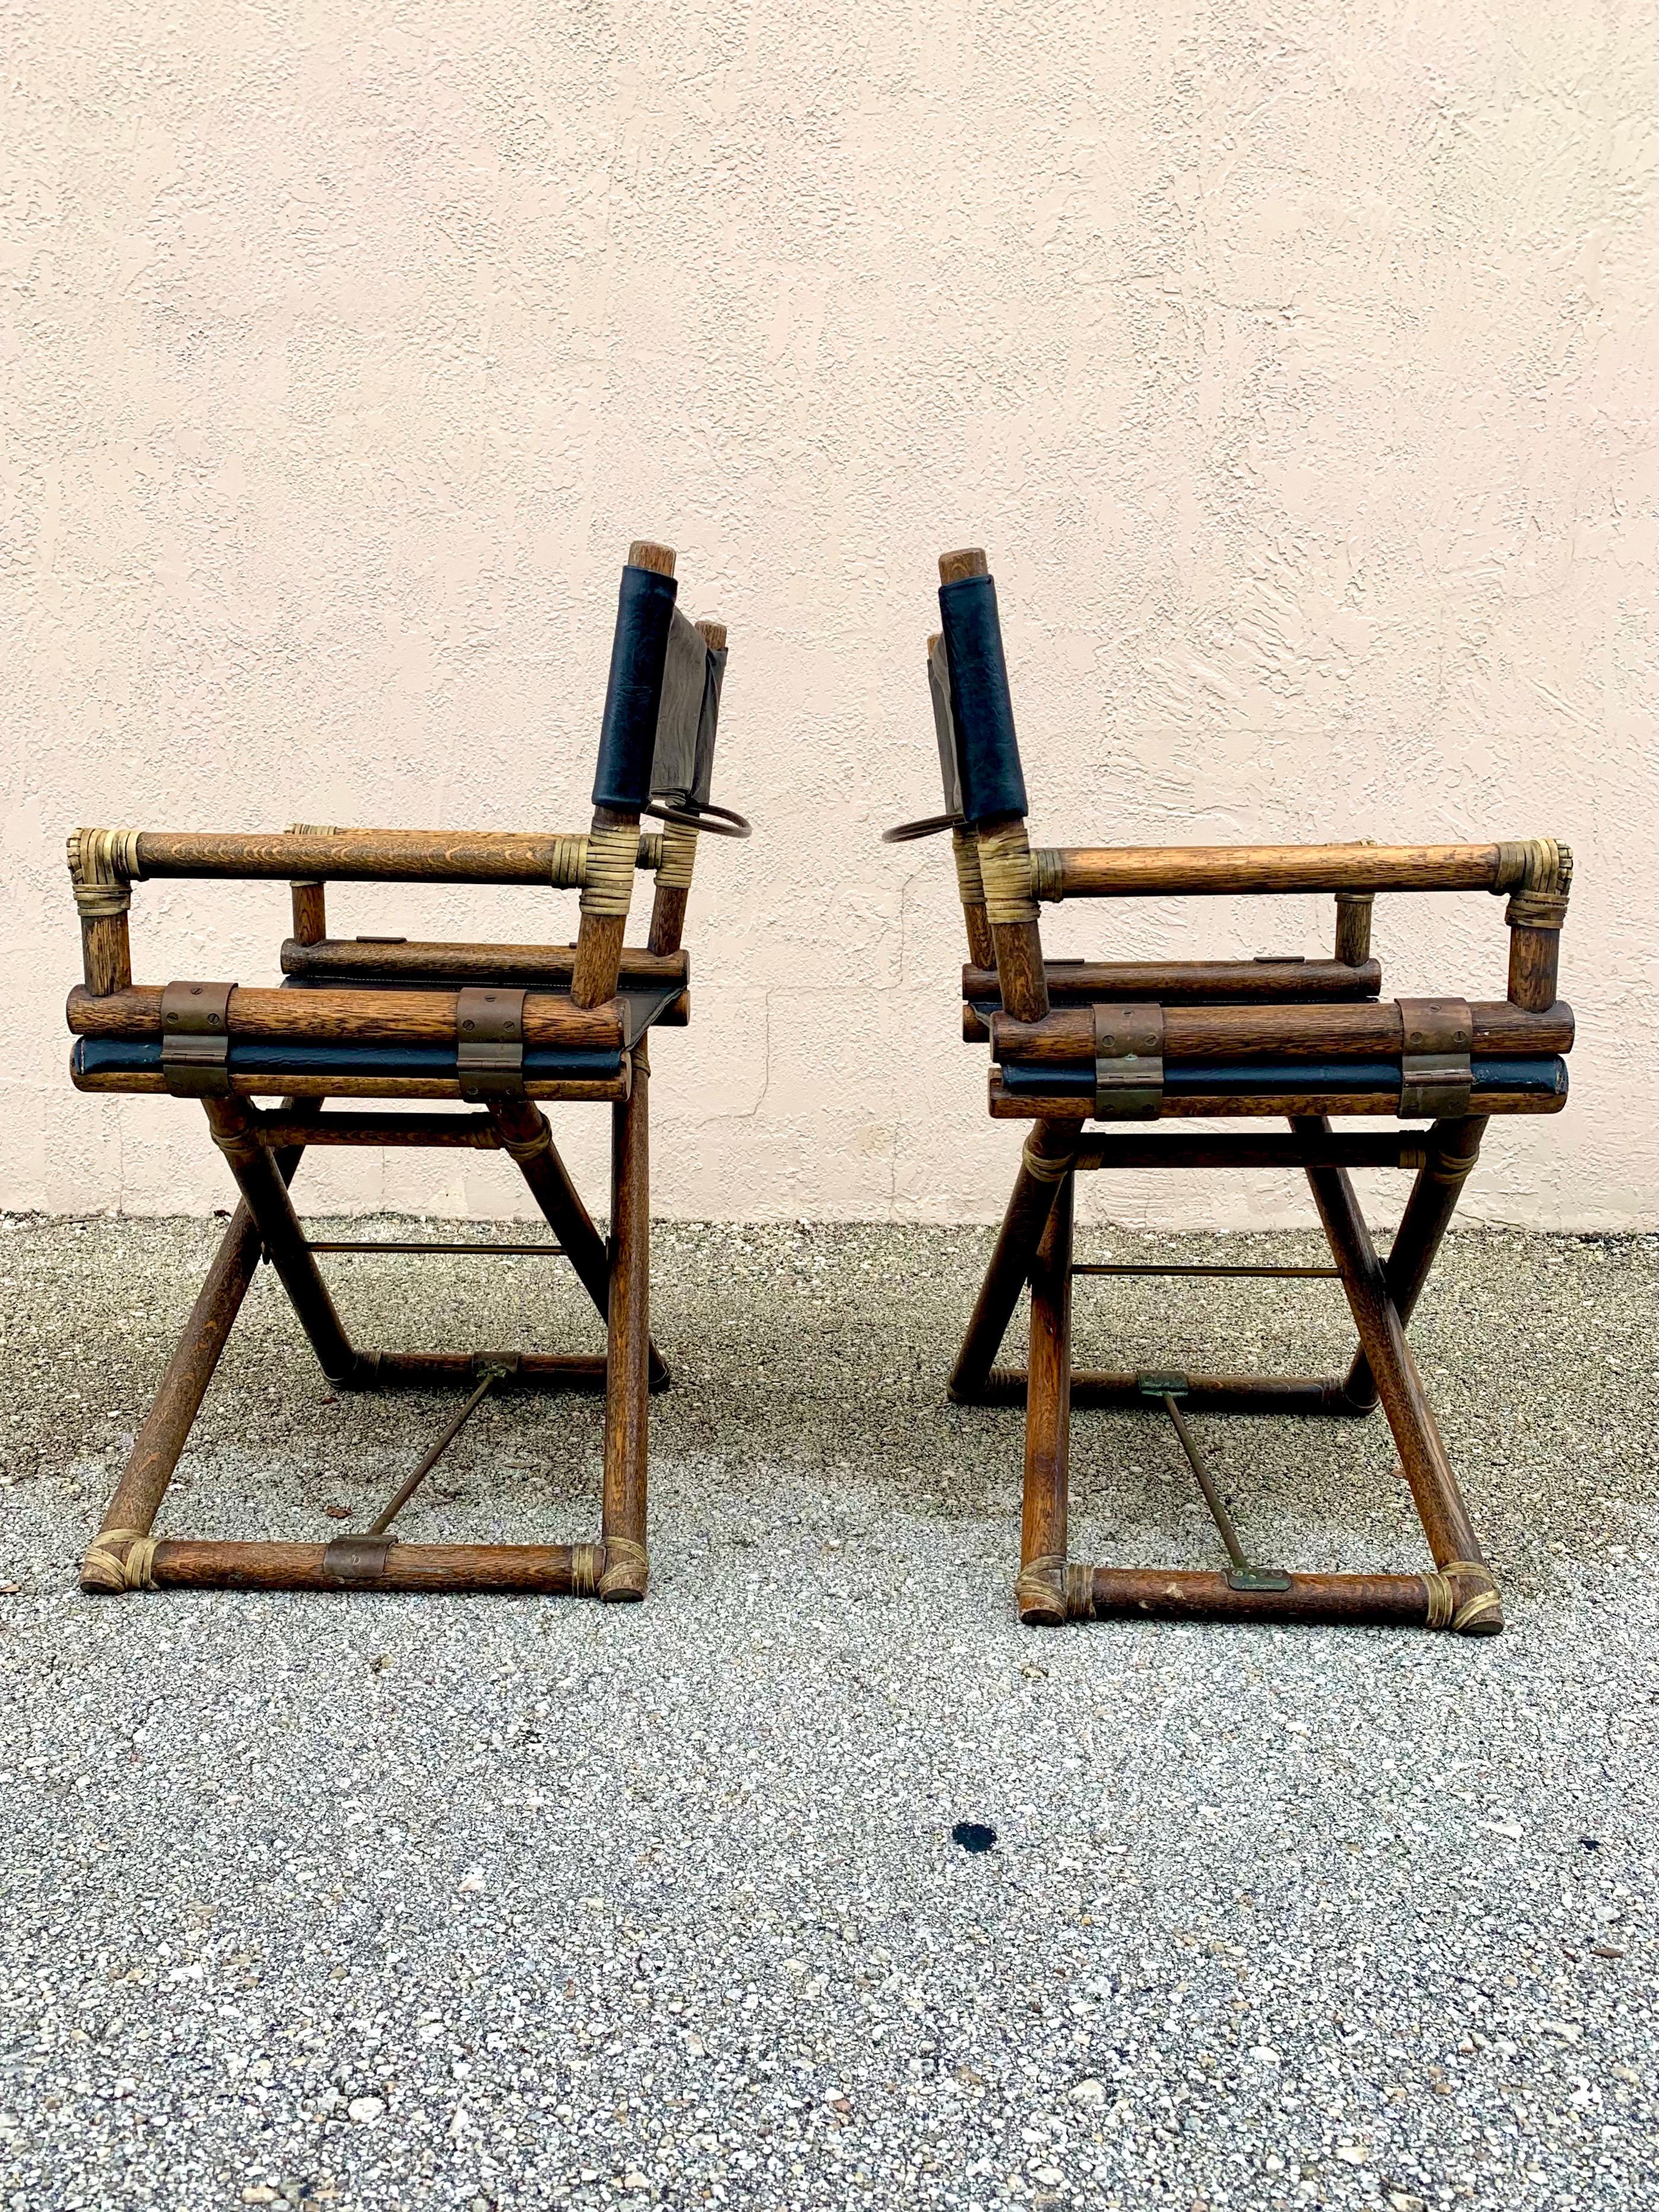 Stunning pair of director chairs made by McGuire Furniture. Oak affixed with rawhide leather wrapping, brass hardware, and high quality black vinyl. All original with incredible patina on the oak and brass. Chairs do fold down for easy storage when